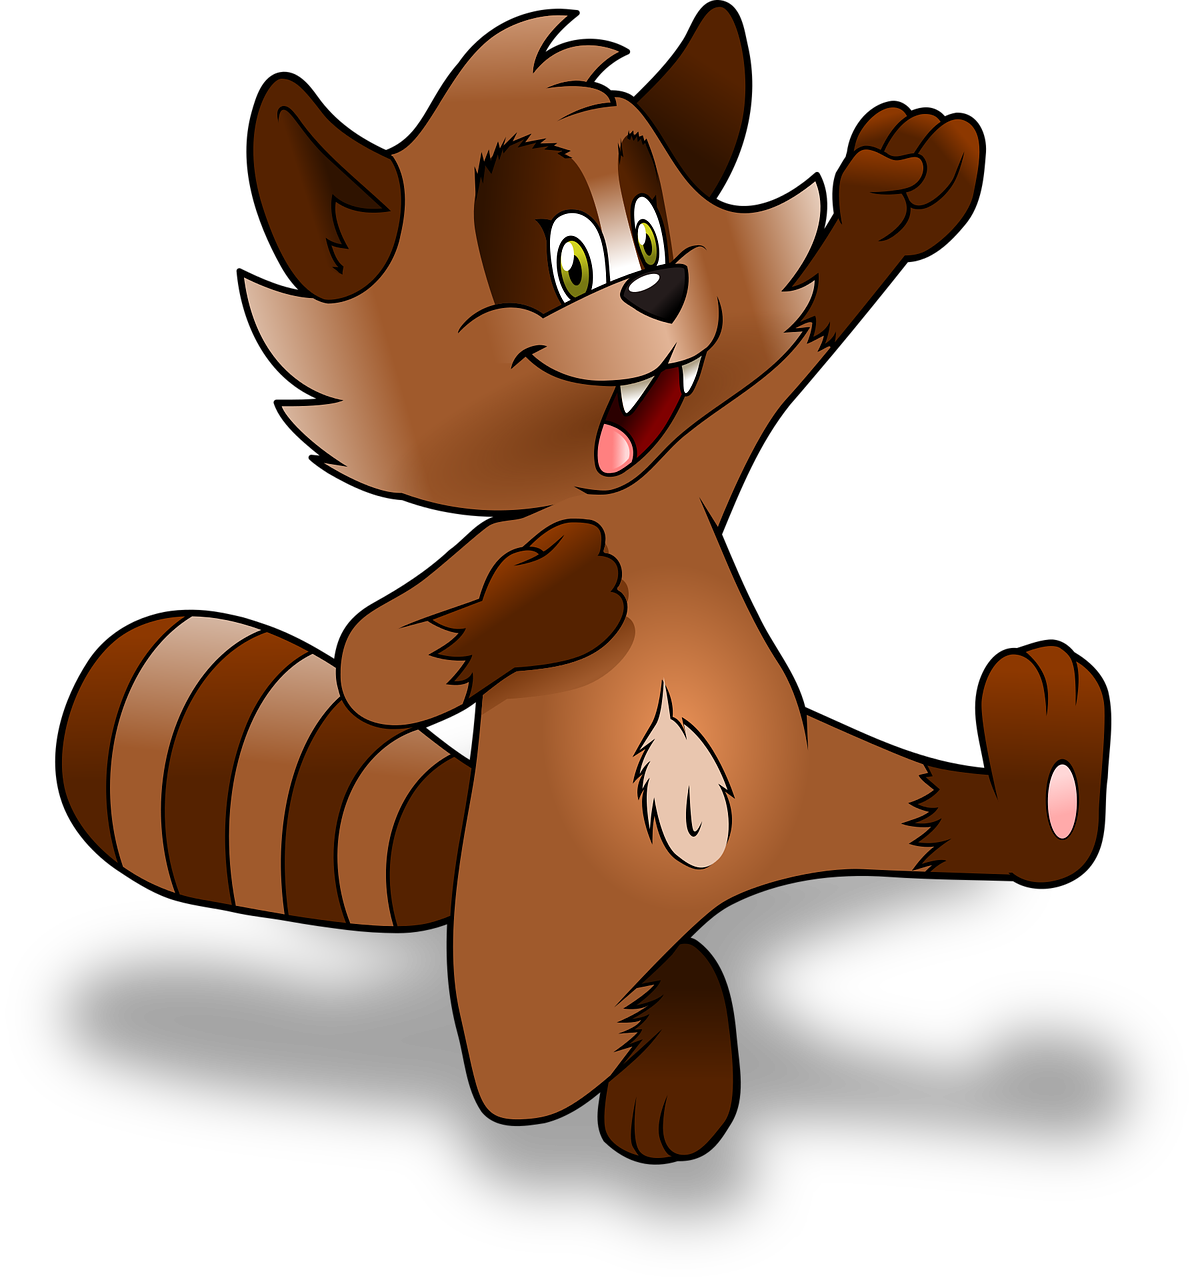 a cartoon raccoon standing on its hind legs, a digital rendering, inspired by Hanna-Barbera, !!!! cat!!!!, logan, sly smile, leaping